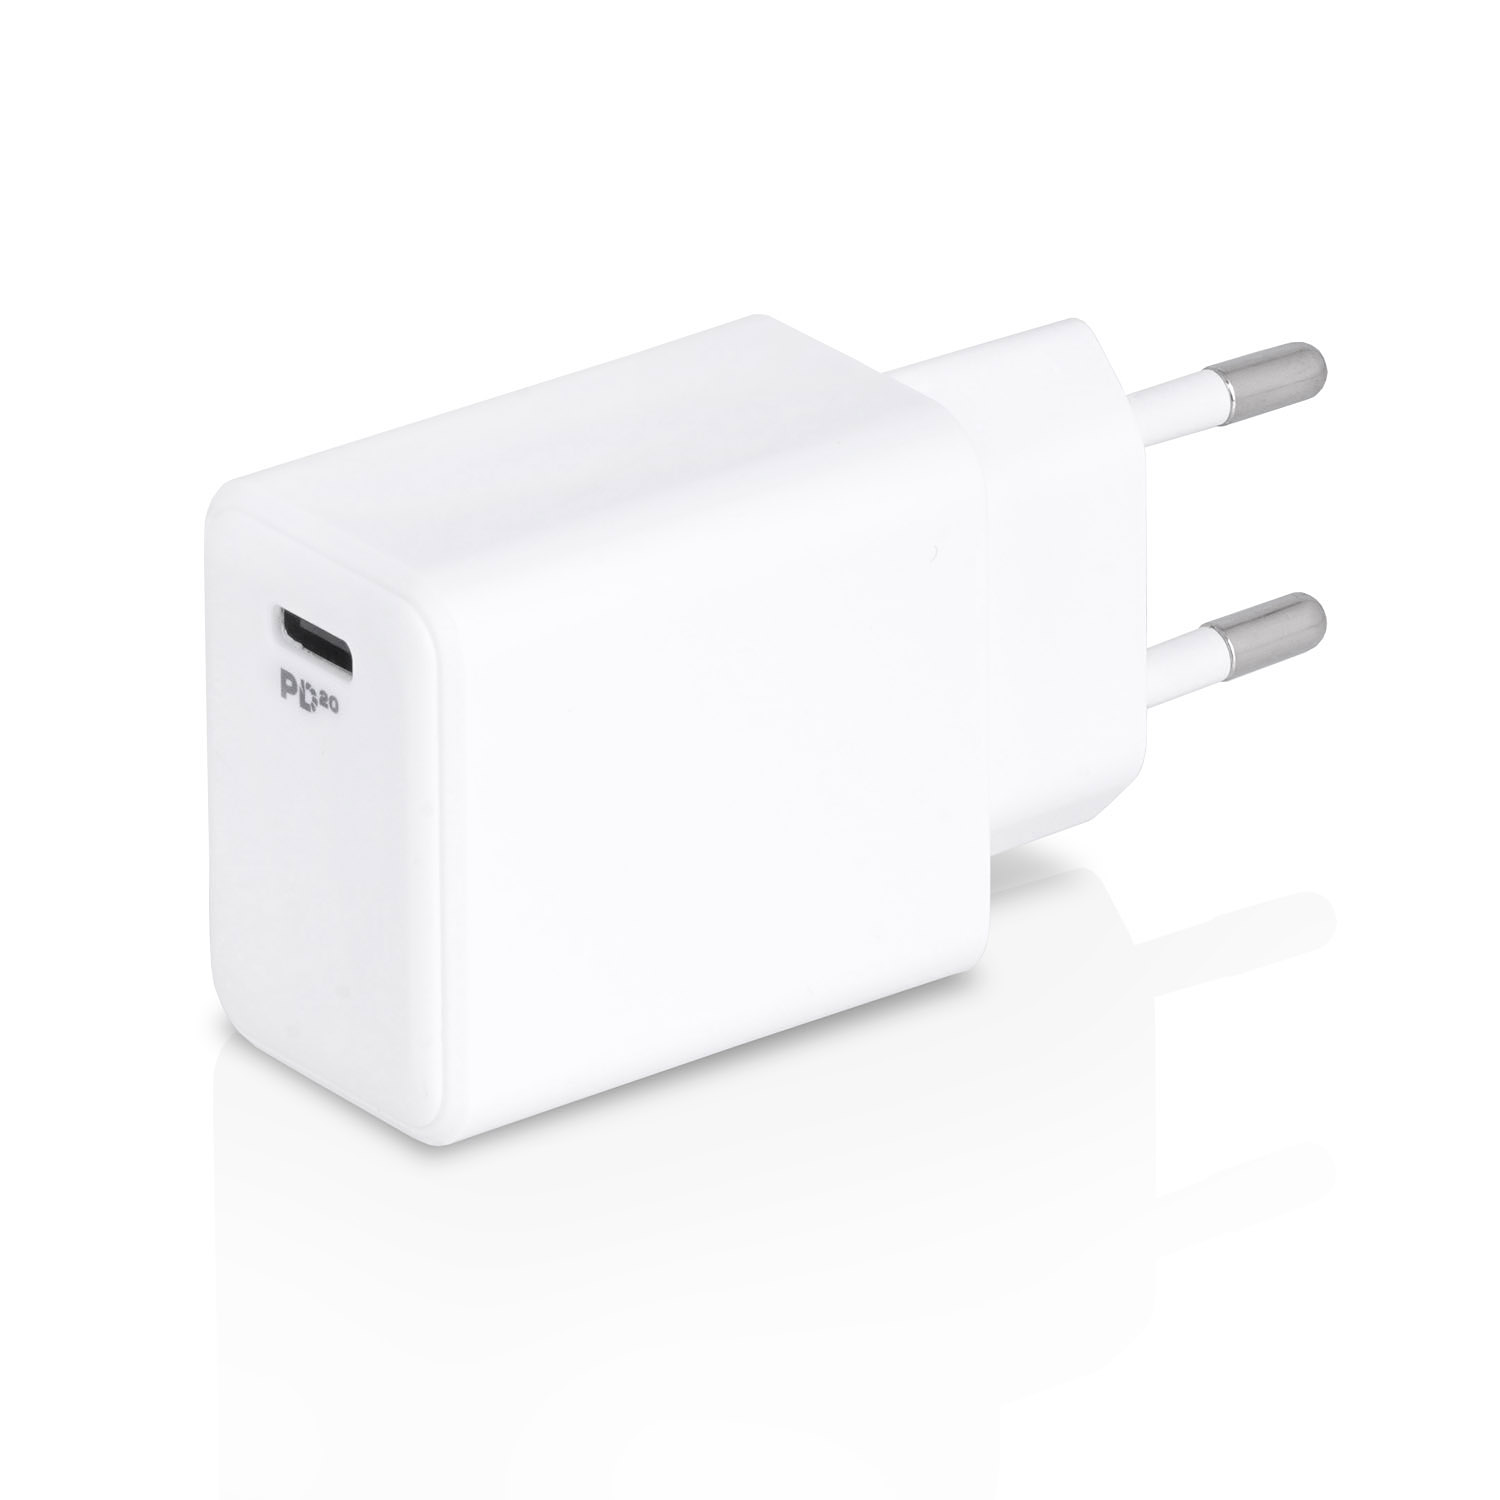 12, USB-C Fast 20W Charge USB-C für Adapter iPhone Adapter Ladegerät 11, 14, Power Netzteil Ladeadapter 13, WICKED CHILI MagSafe